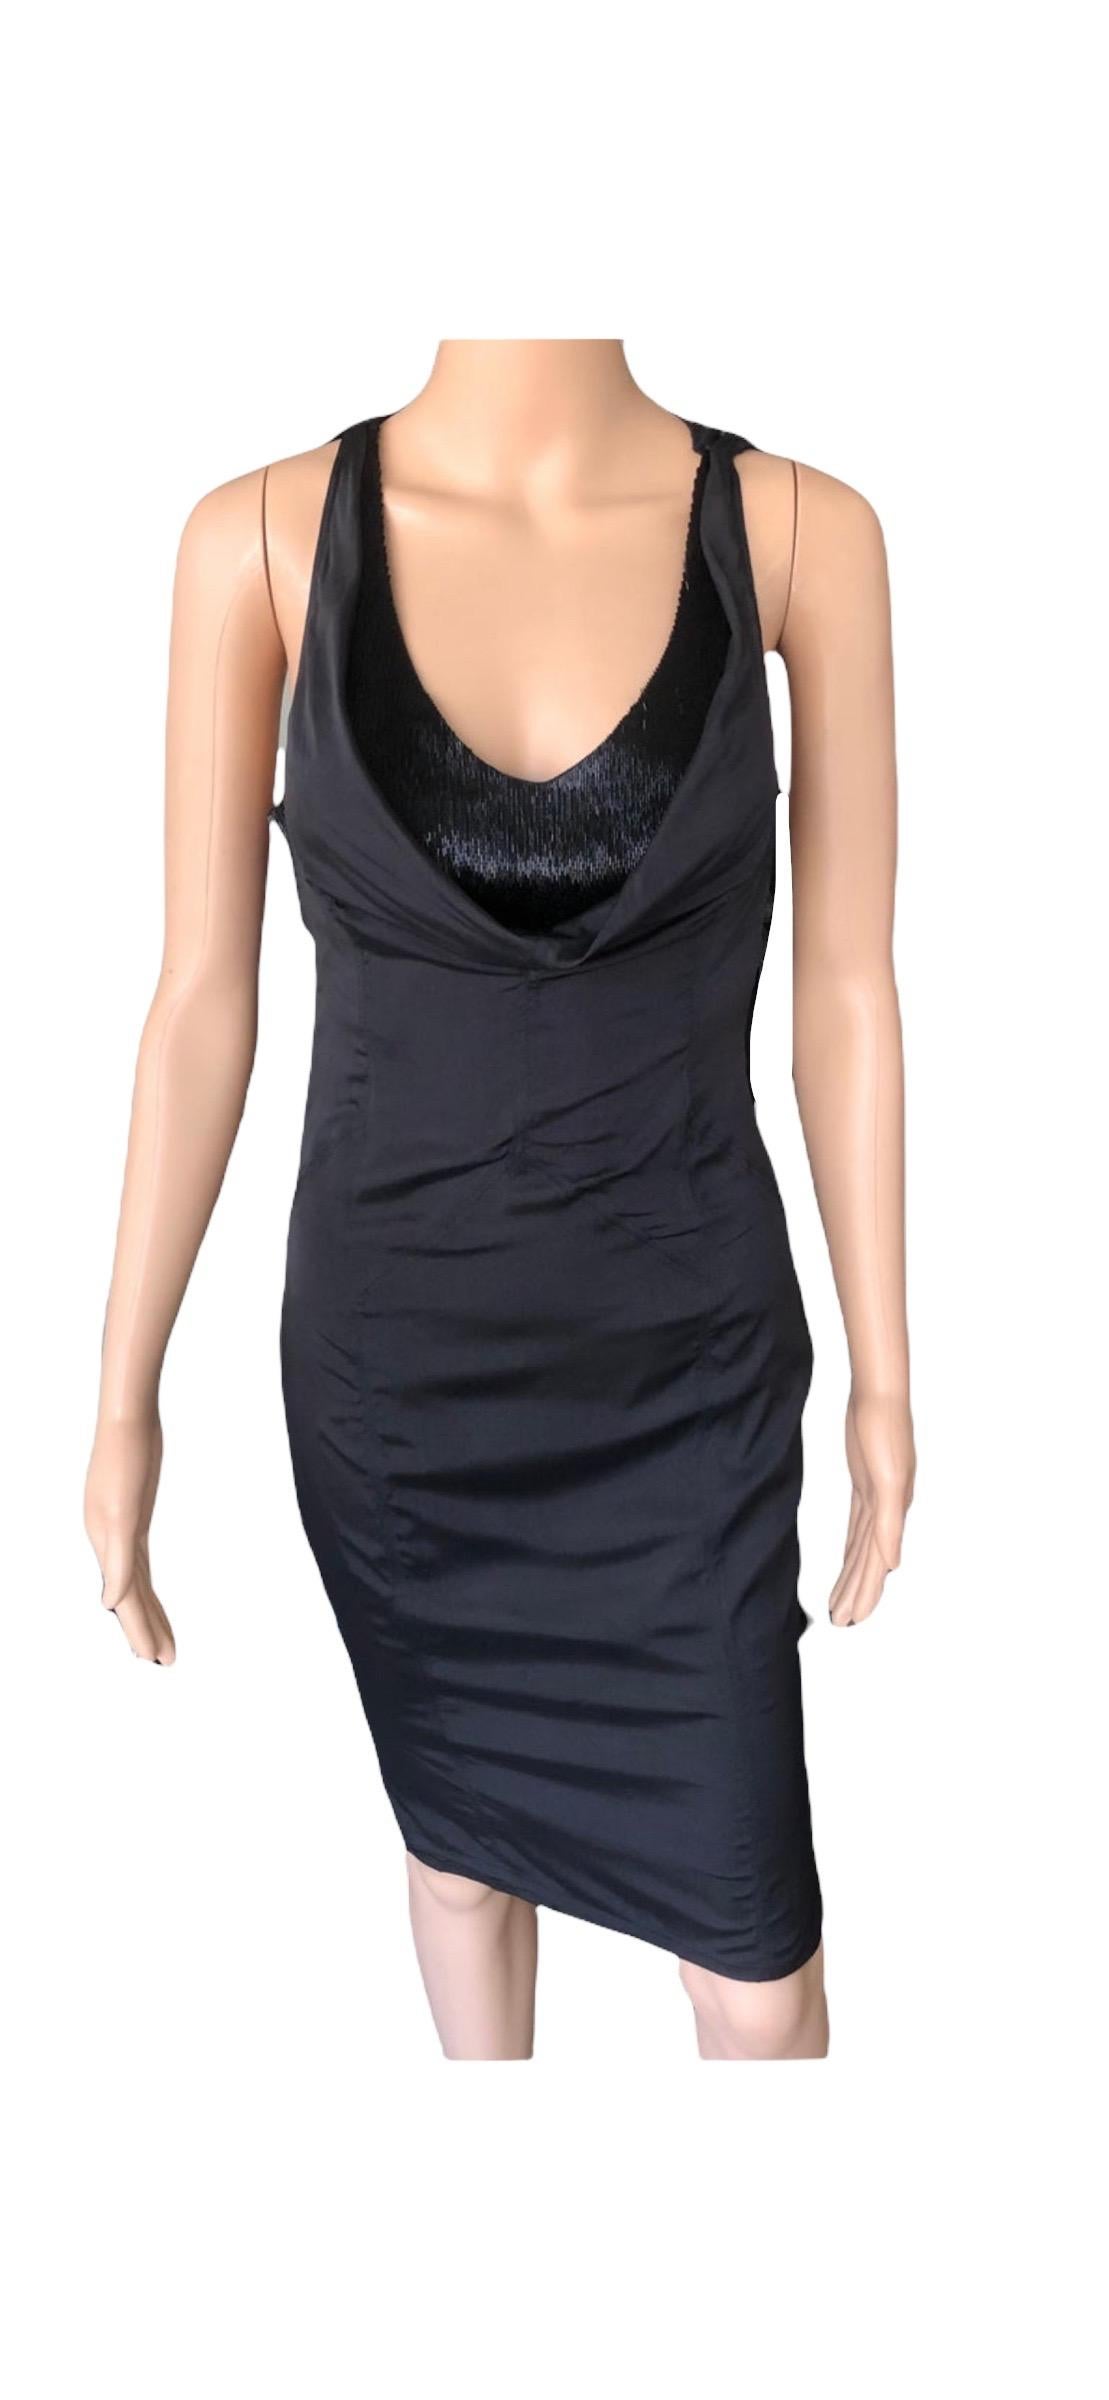 Tom Ford for Gucci F/W 2003 Runway Embellished Cutout Bustier Silk Black Dress For Sale 7